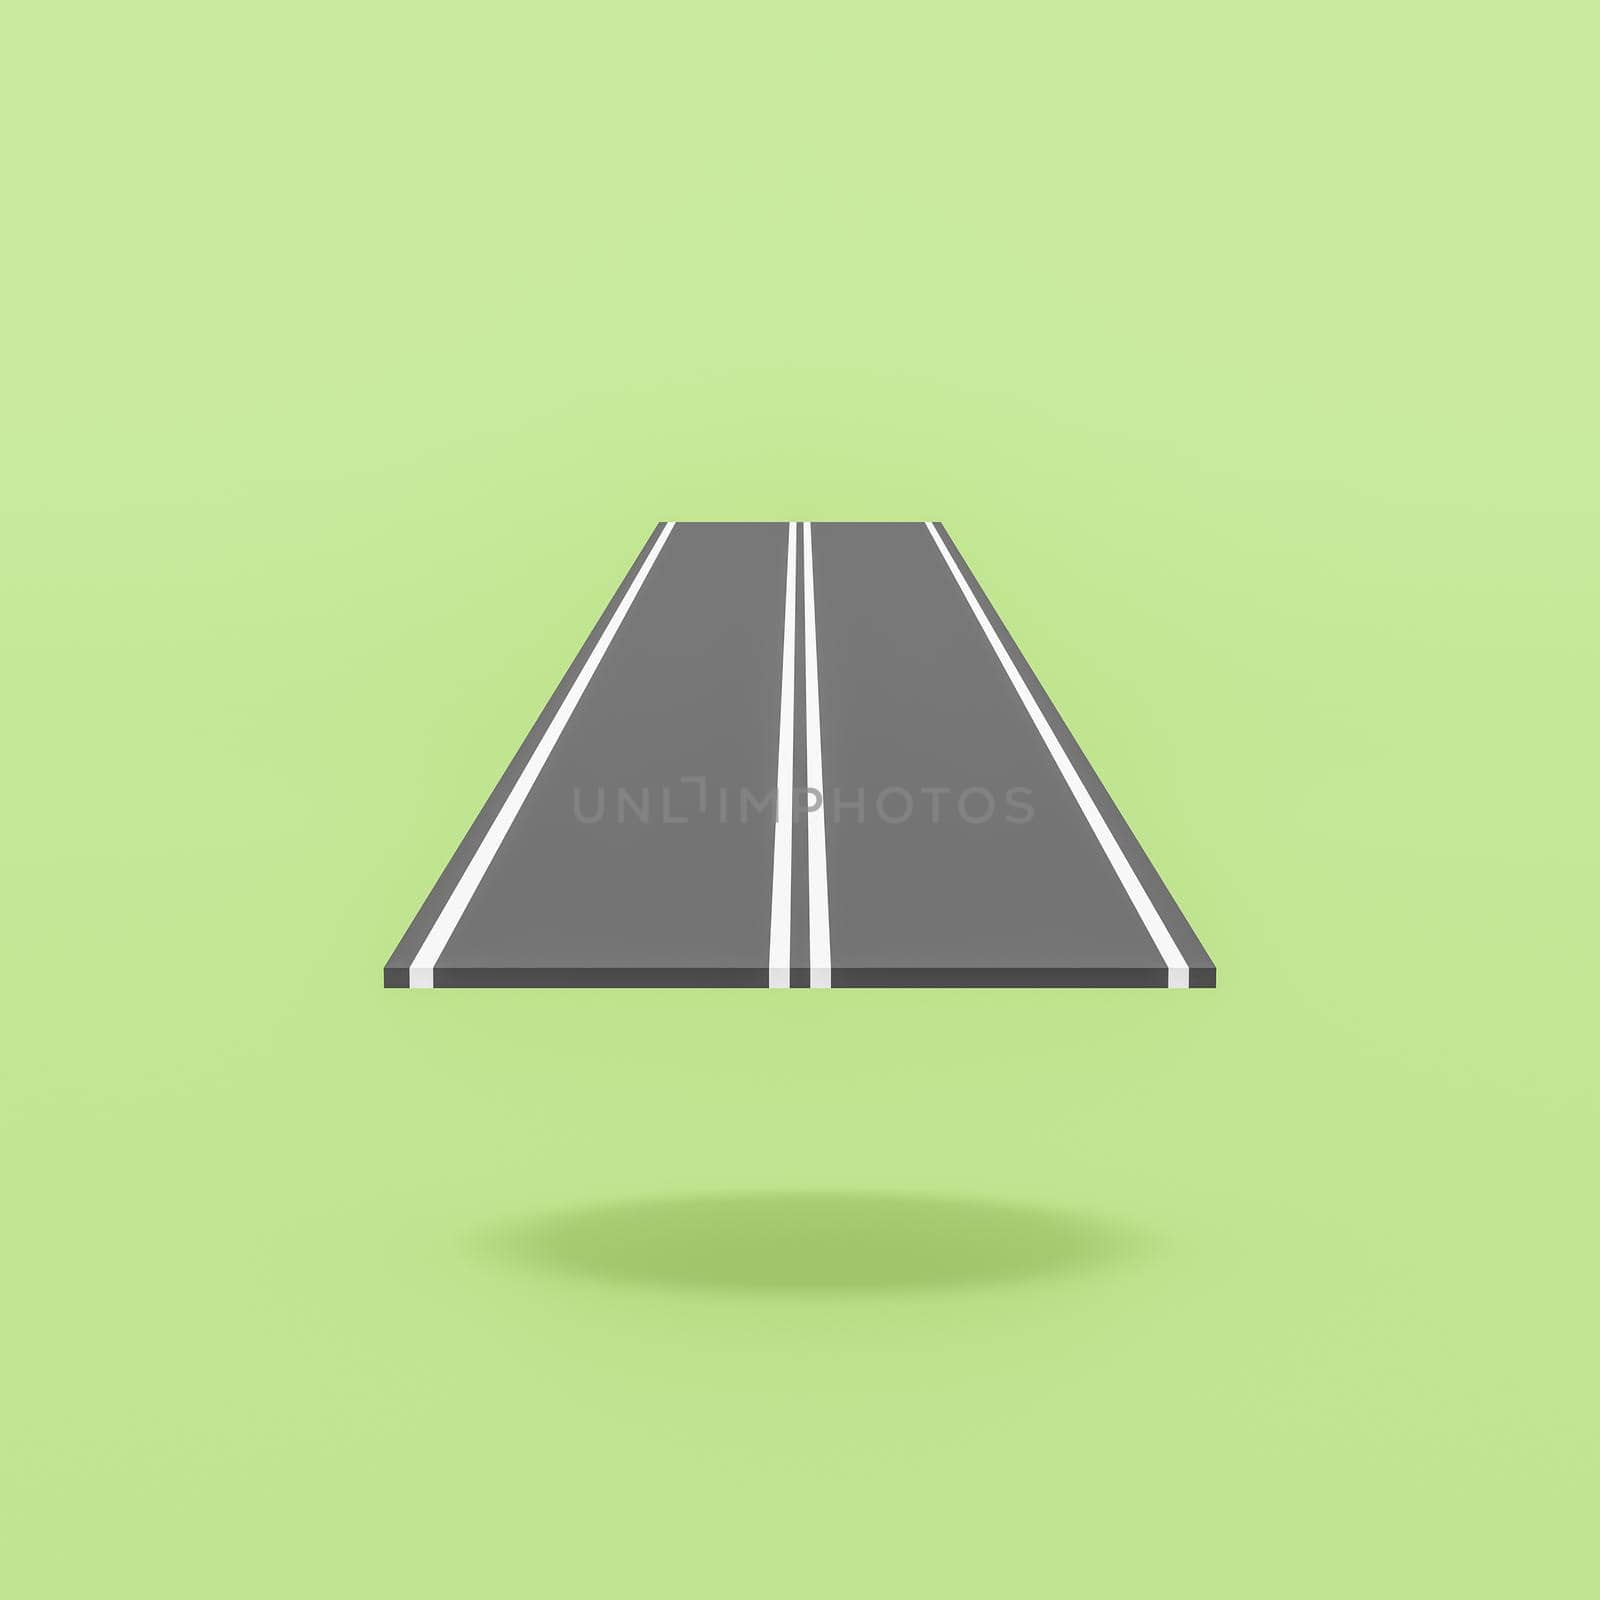 Cartoon Asphalt Road Isolated on Flat Green Background with Shadow 3D Illustration